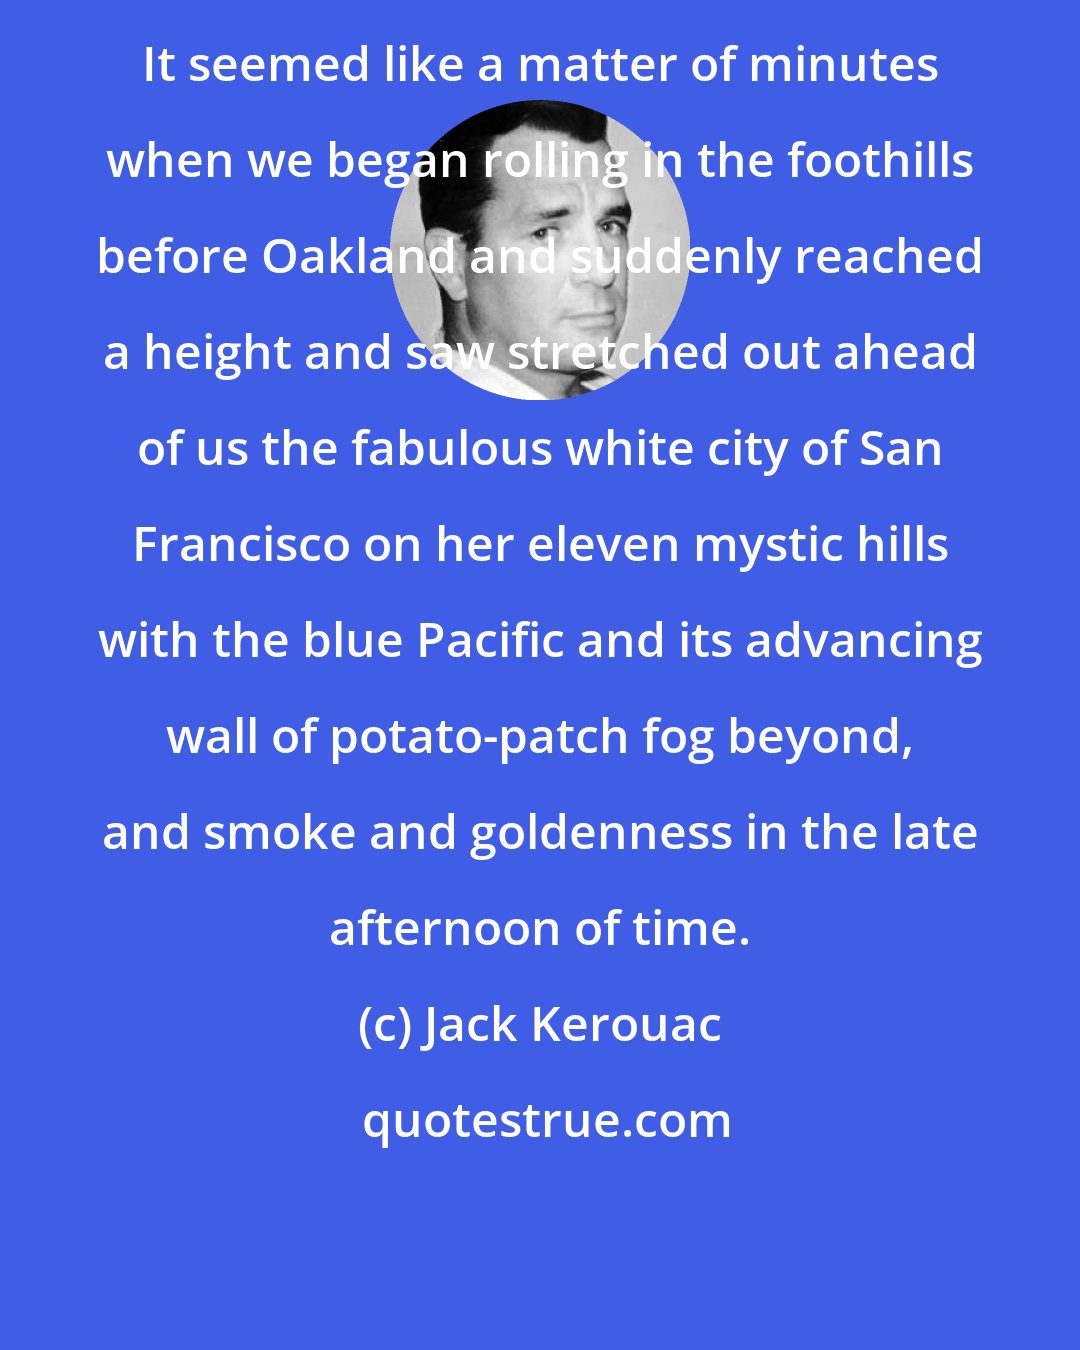 Jack Kerouac: It seemed like a matter of minutes when we began rolling in the foothills before Oakland and suddenly reached a height and saw stretched out ahead of us the fabulous white city of San Francisco on her eleven mystic hills with the blue Pacific and its advancing wall of potato-patch fog beyond, and smoke and goldenness in the late afternoon of time.